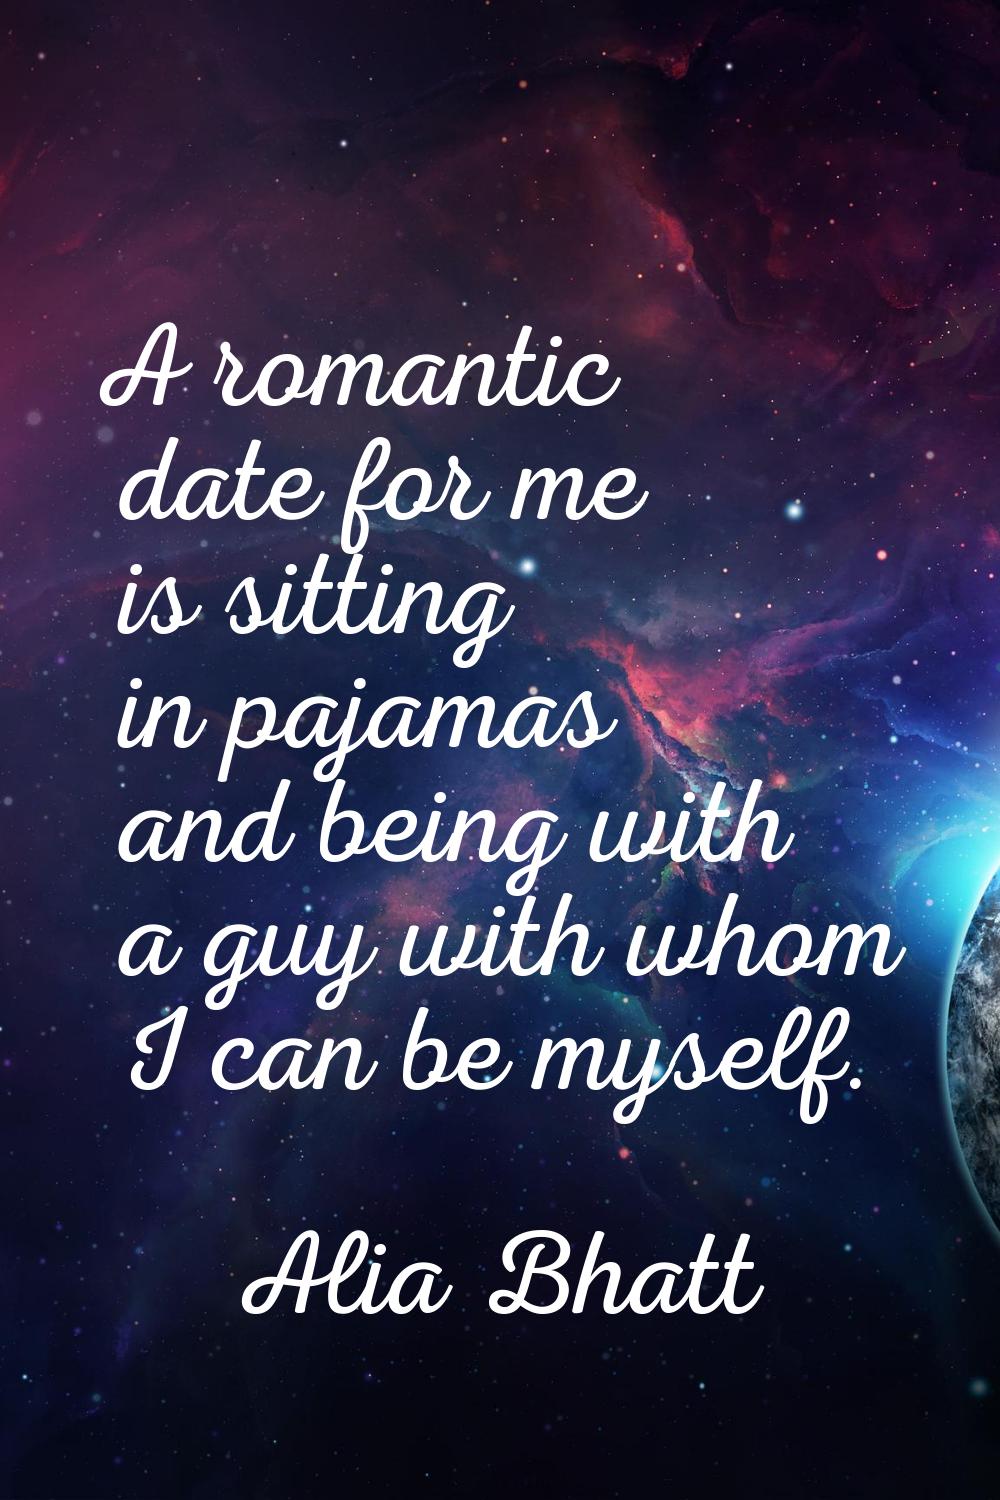 A romantic date for me is sitting in pajamas and being with a guy with whom I can be myself.